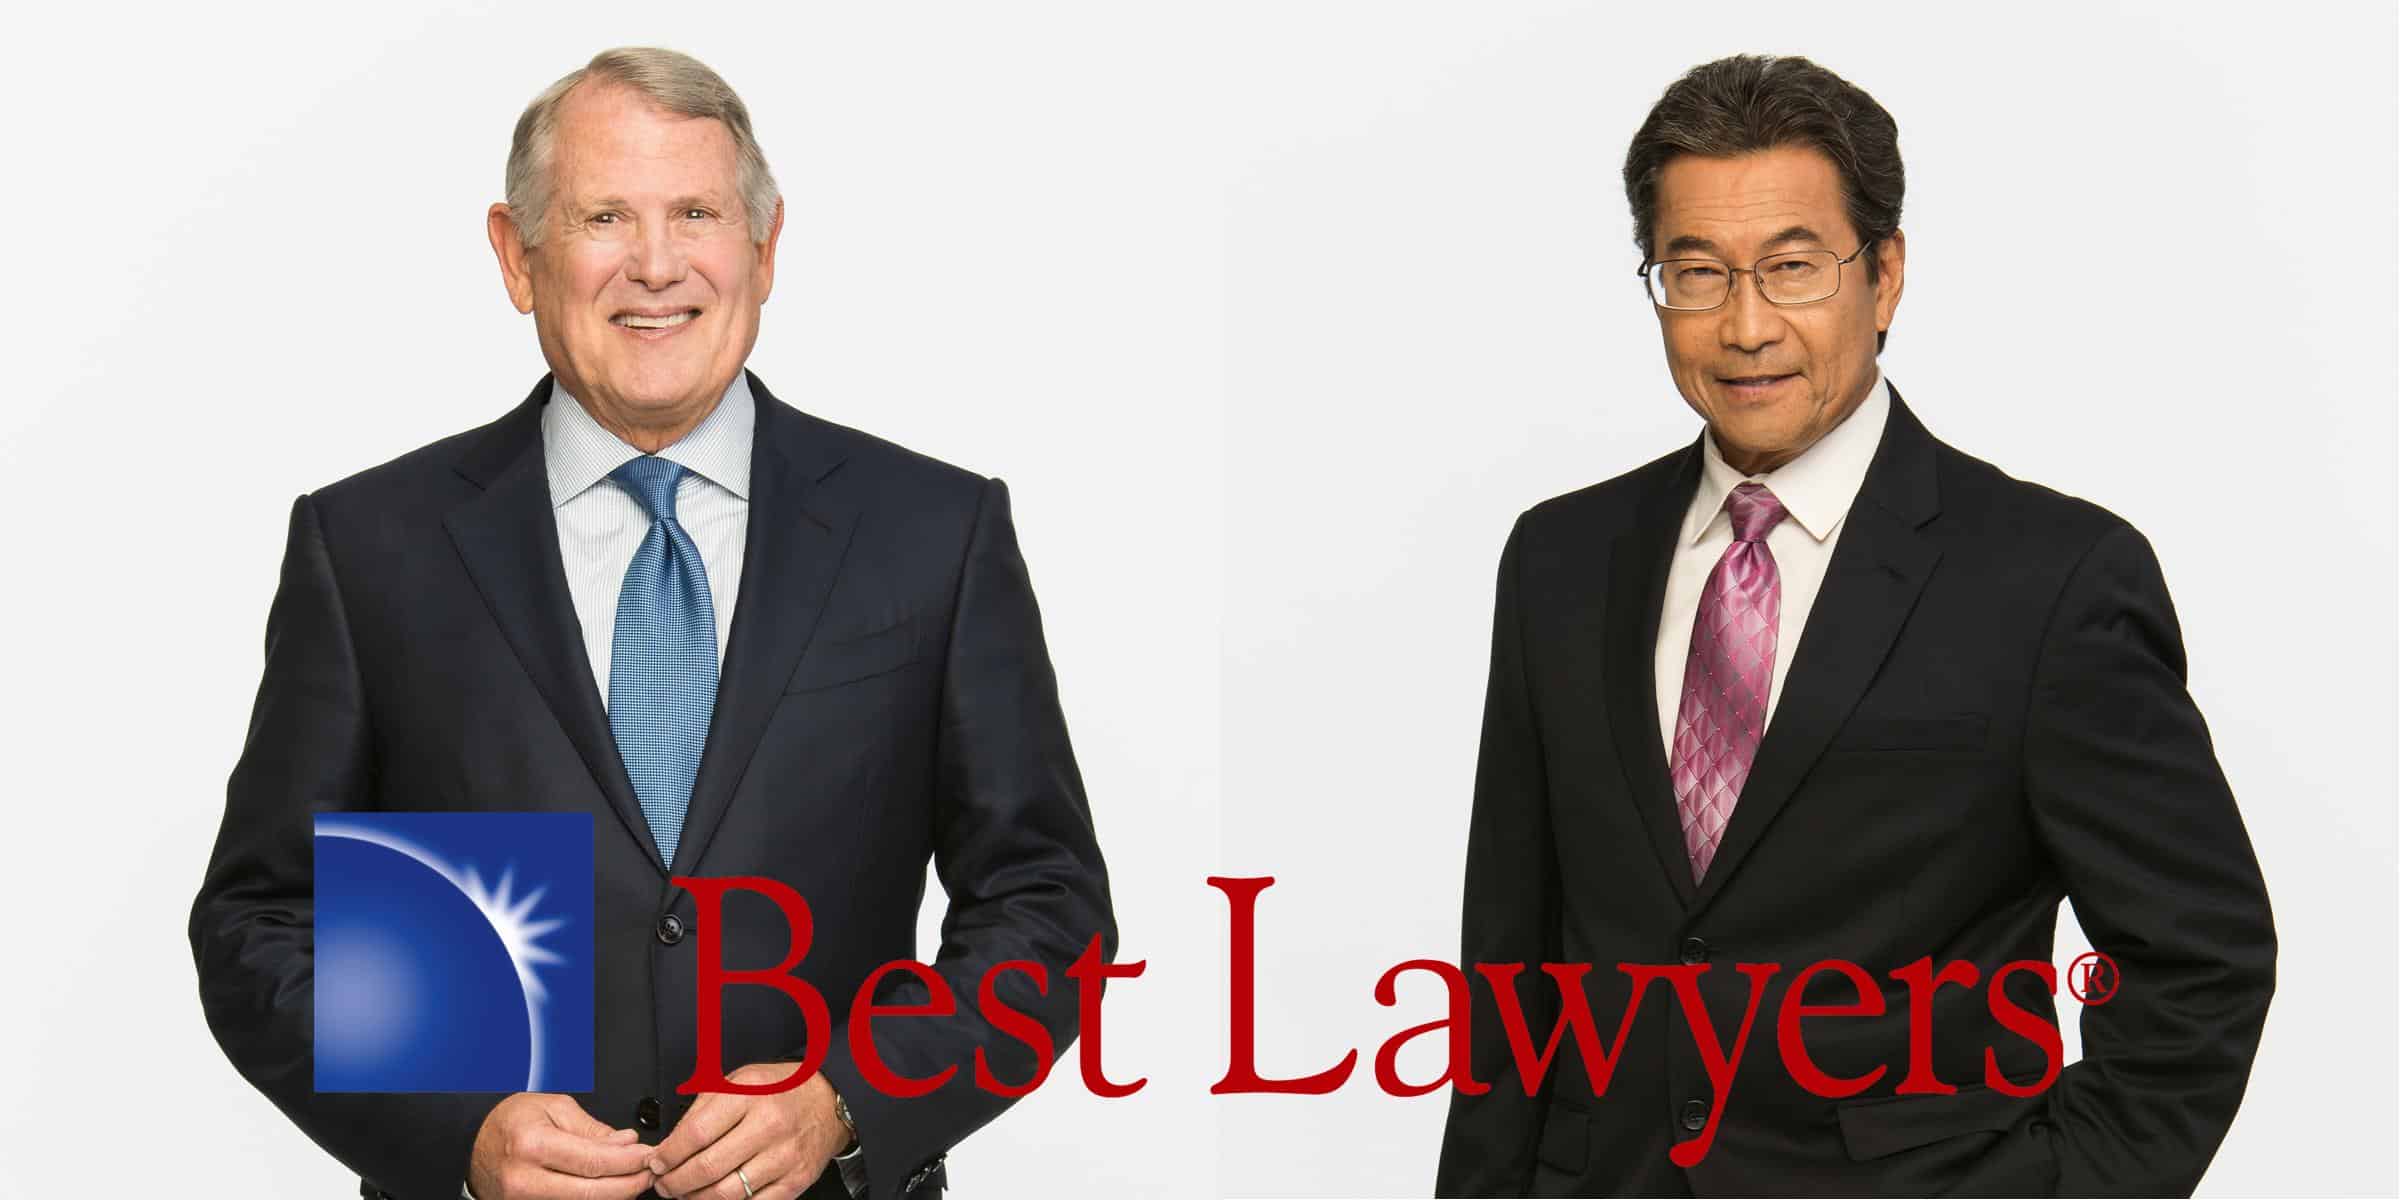 Chain | Cohn | Clark’ David Cohn, James Yoro selected to ‘The Best Lawyers in America’ publication